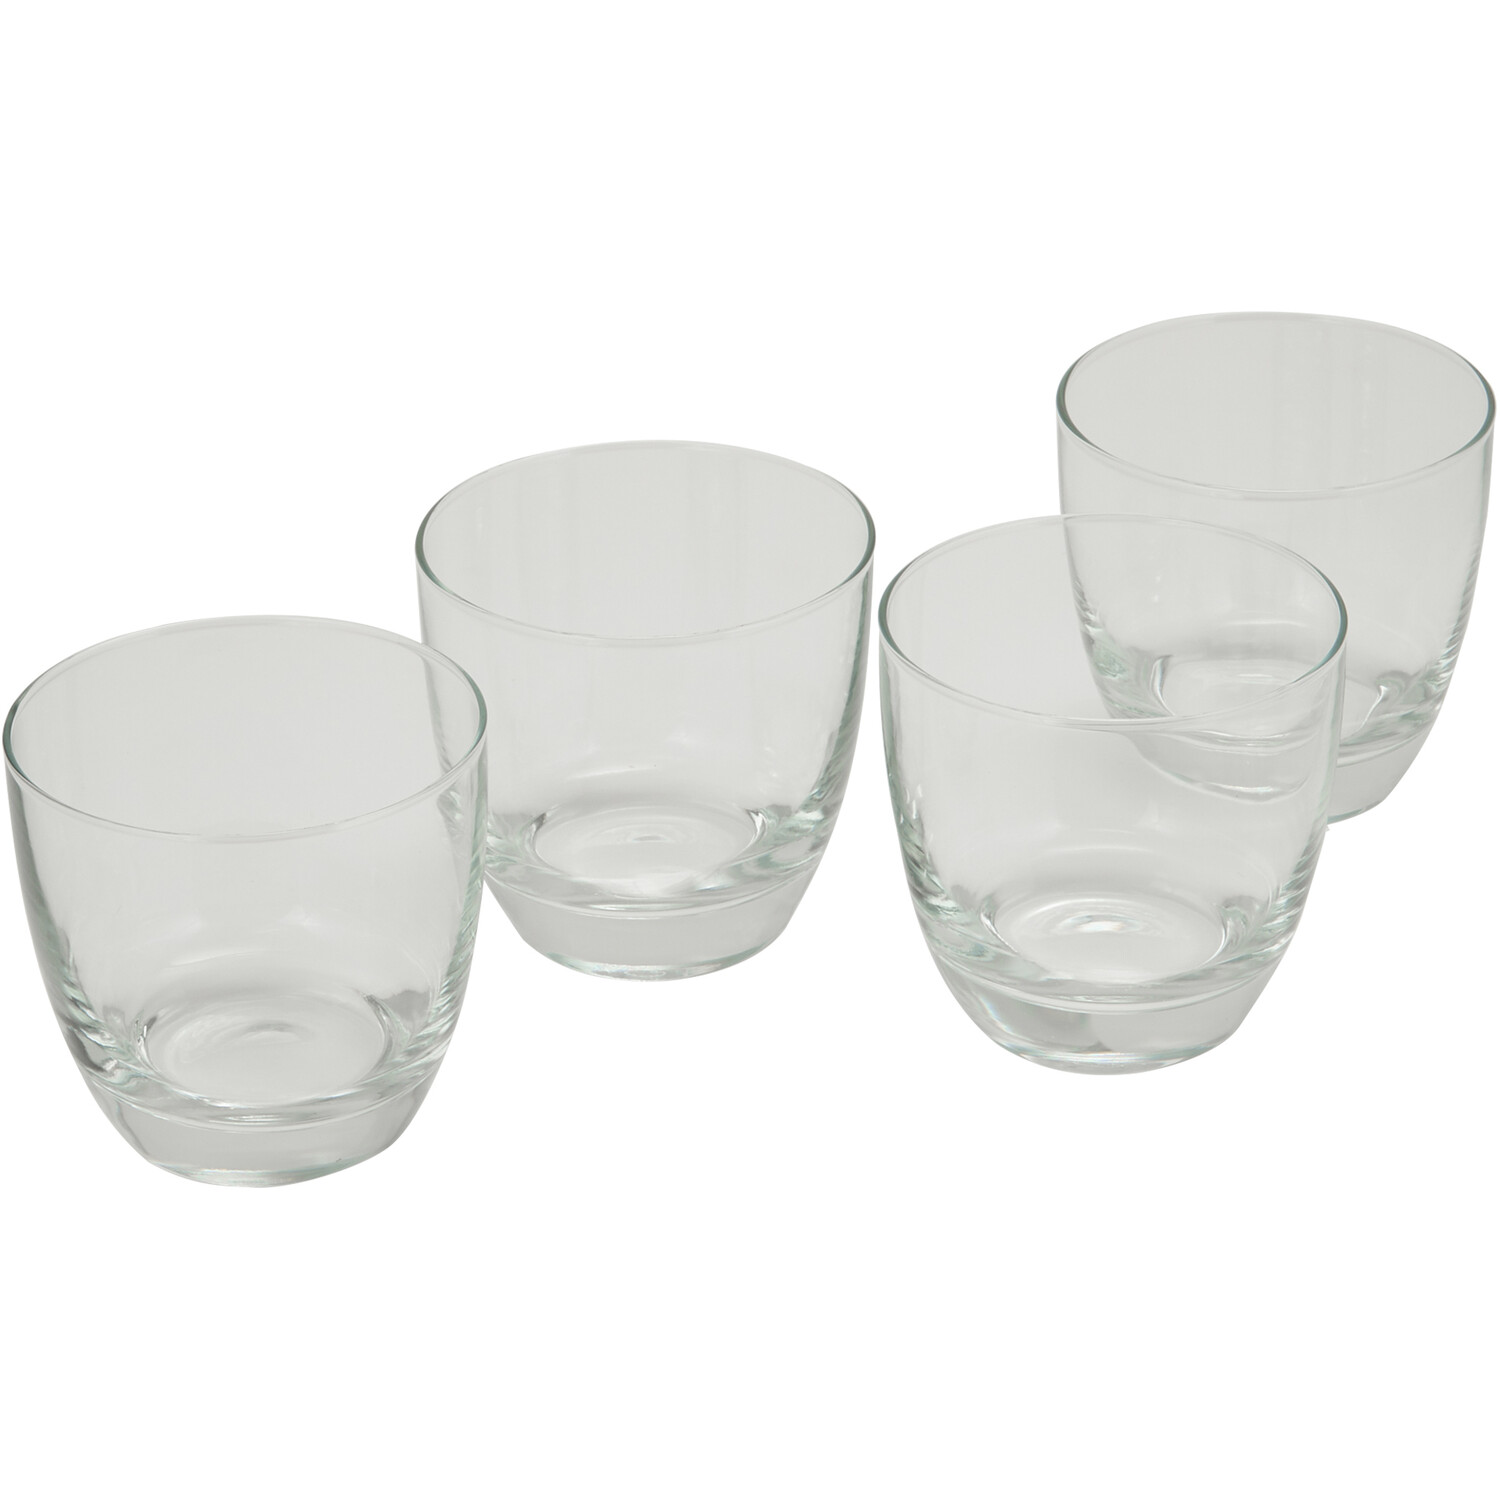 Pack of 4 Indulgence Mixers - Clear Image 1